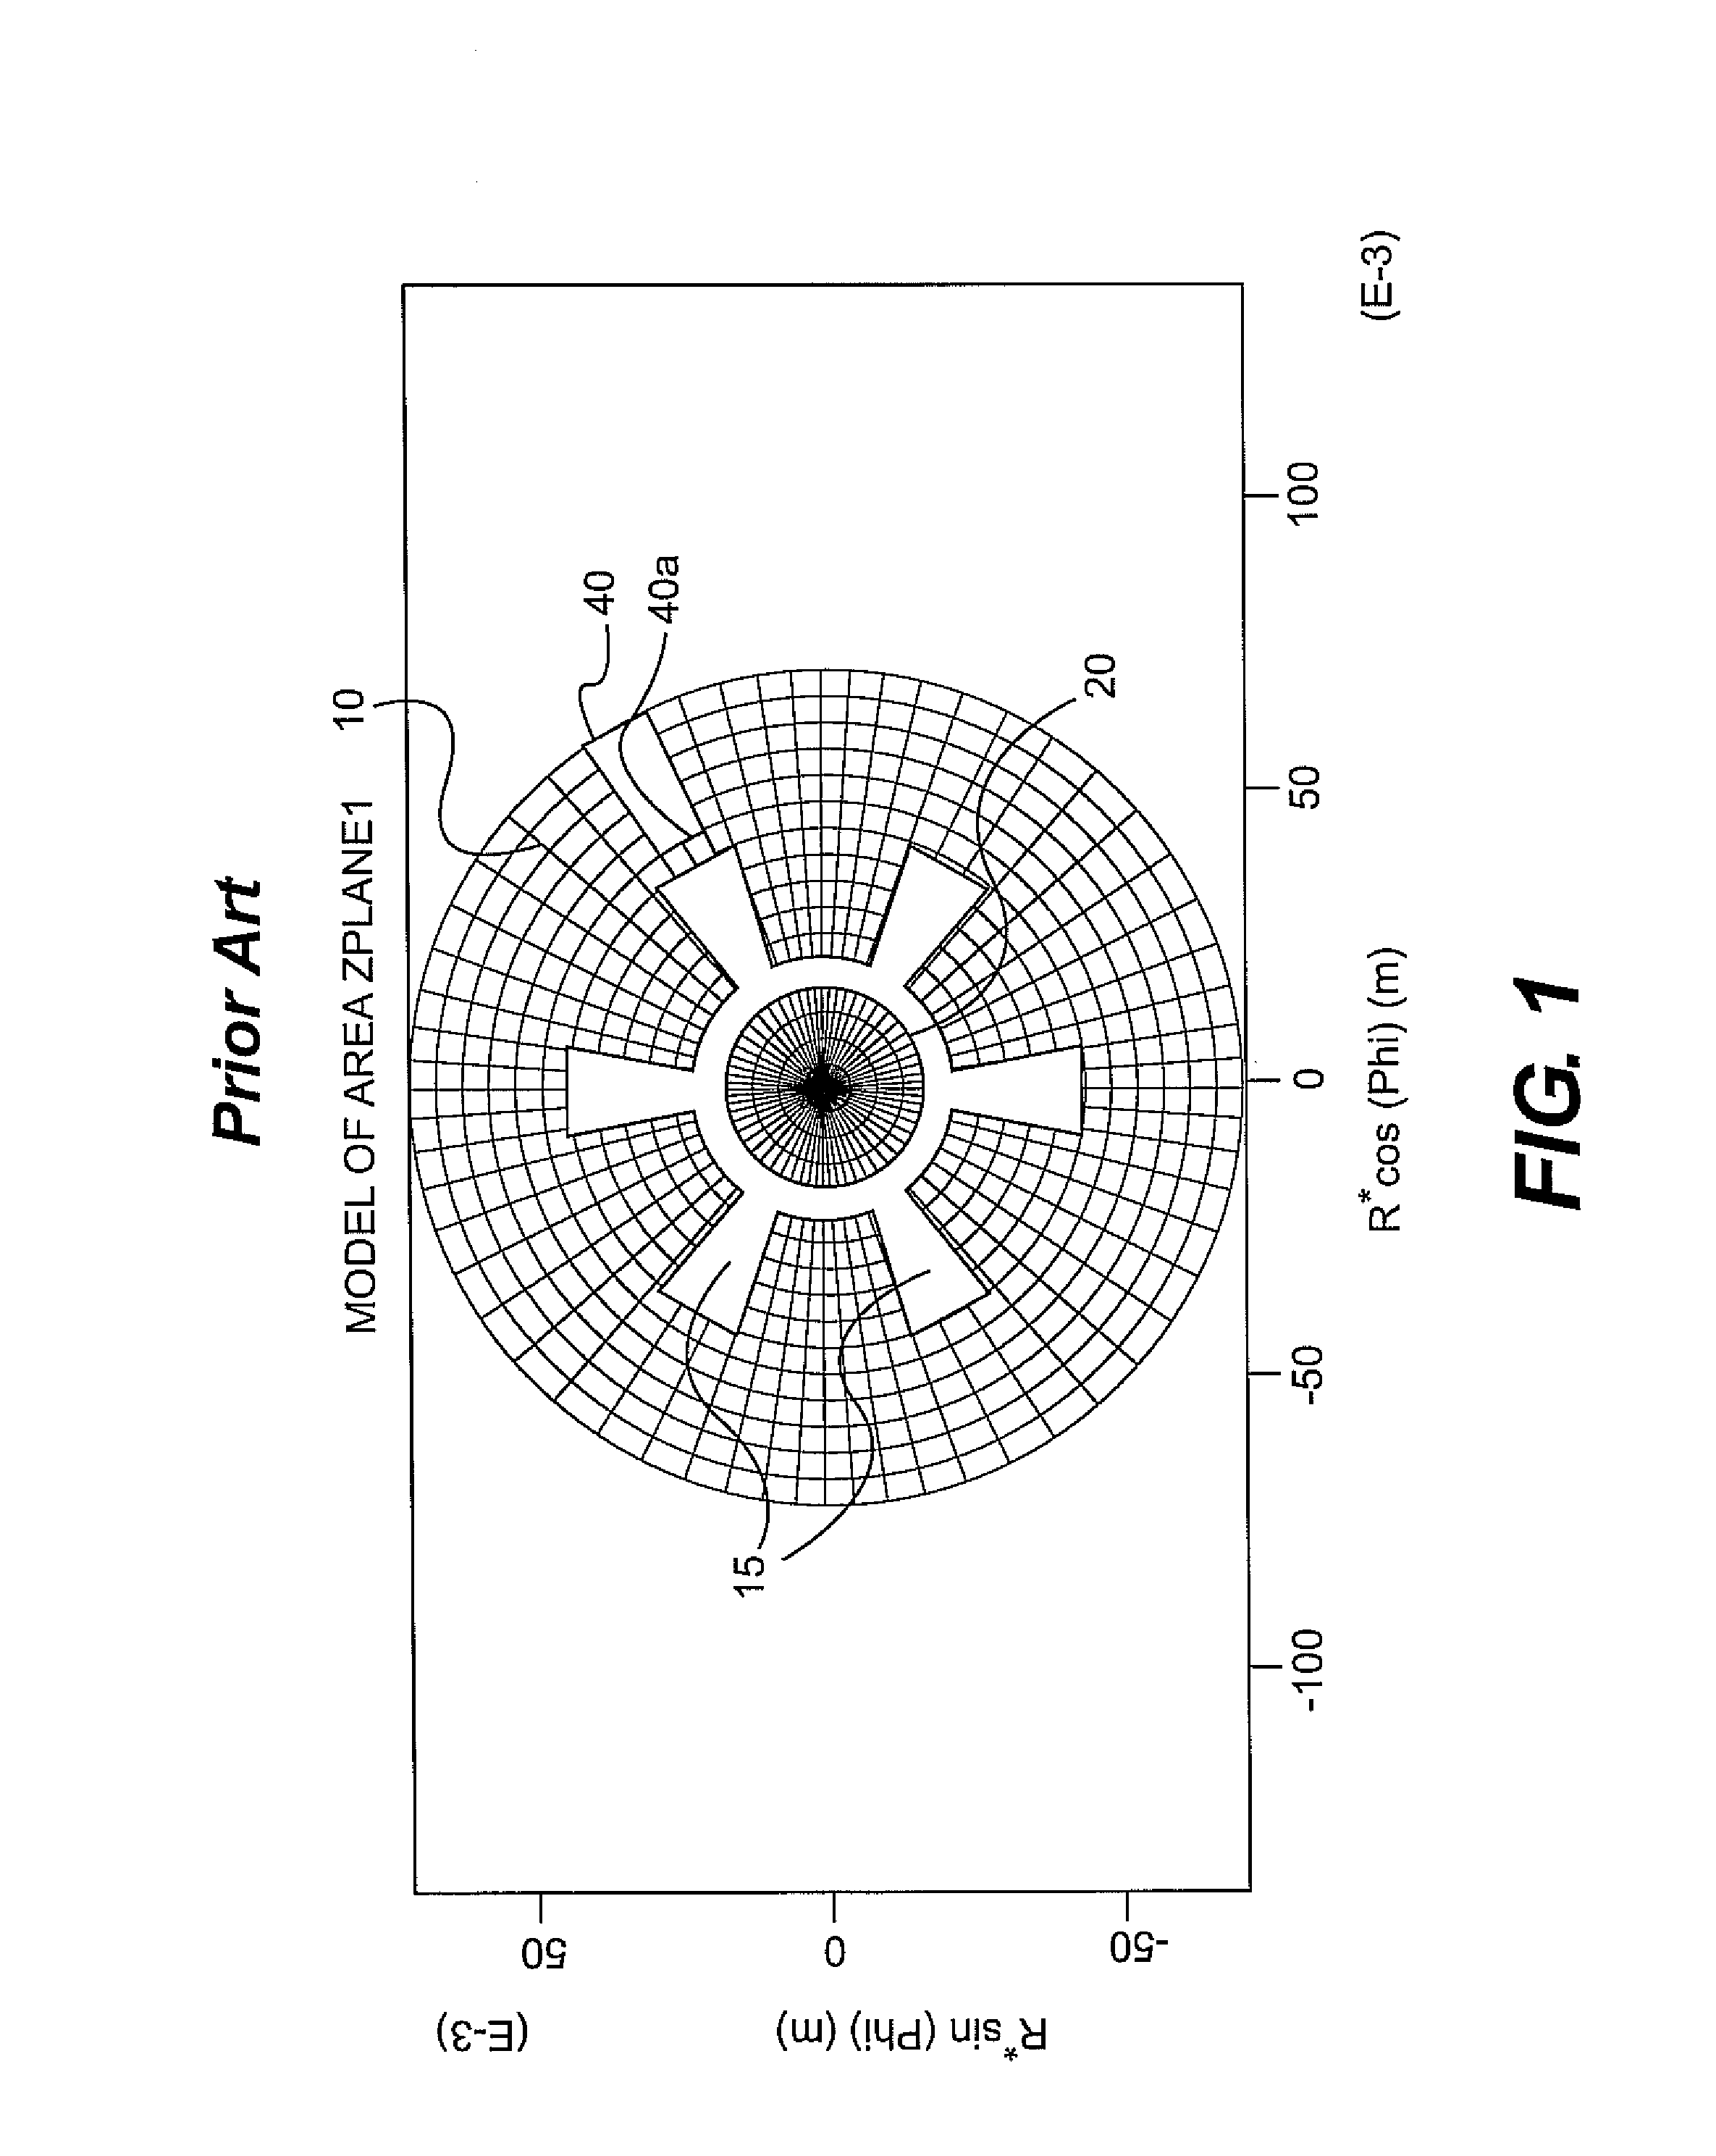 Magnetron having a transparent cathode and related methods of generating high power microwaves